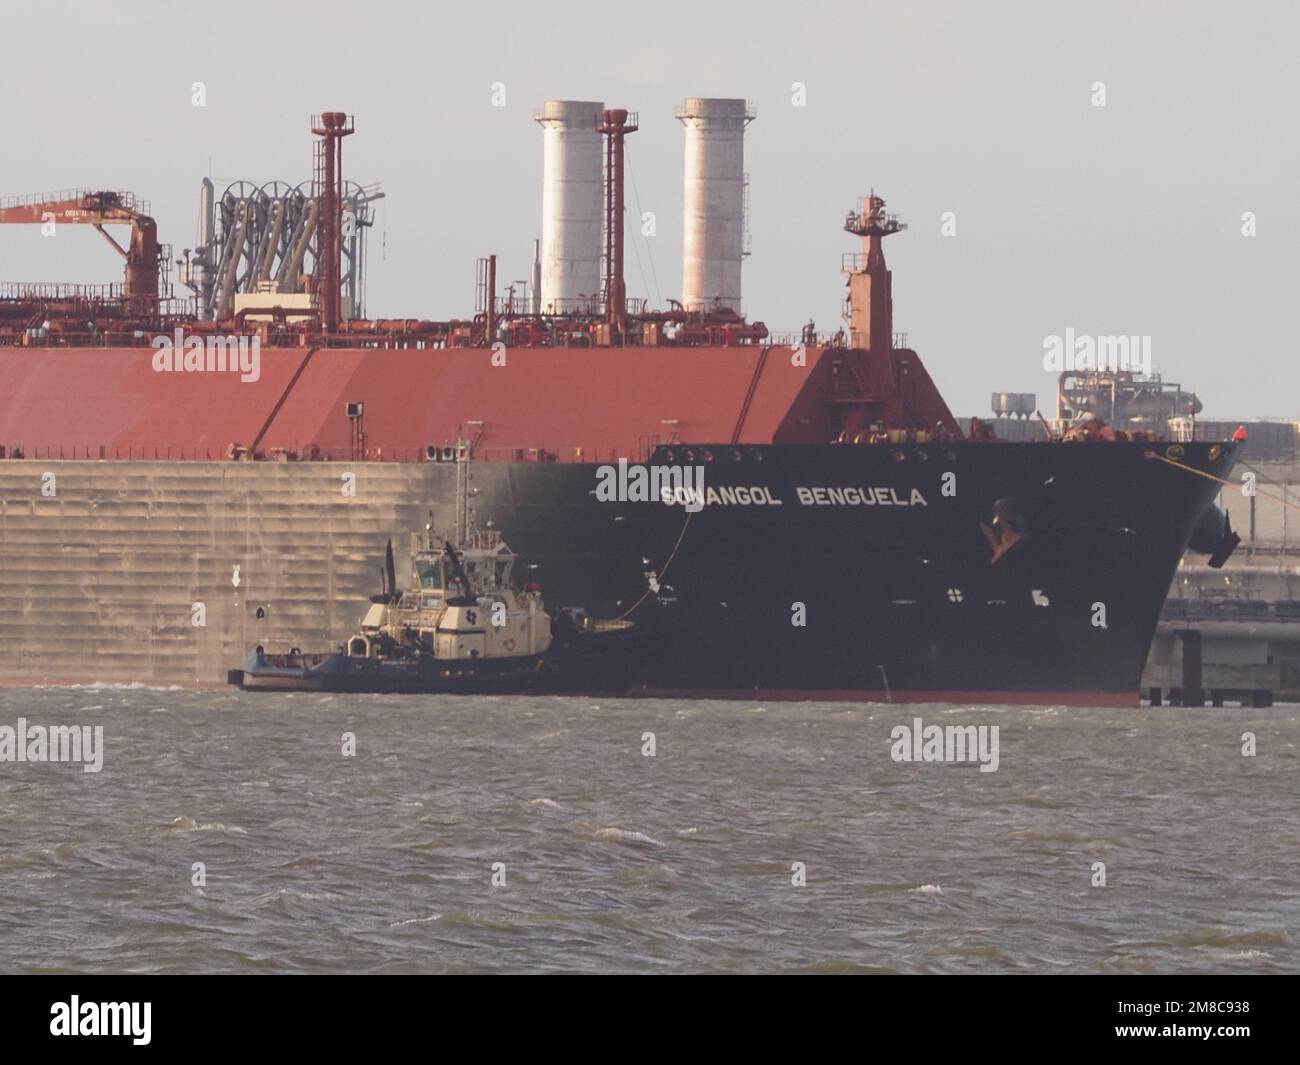 Sheerness, Kent, UK. 13th Jan, 2023. UK gas prices forecast to drop: two LNG gas ships seen berthed at National Grid's Grain LNG facility (Europe's largest storage facility) this afternoon pictured from Sheerness, Kent. Red hulled vessel is Rias Baixas Knutsen, blue hulled vessel arrived this afternoon is Sonangol Benguela. Credit: James Bell/Alamy Live News Stock Photo